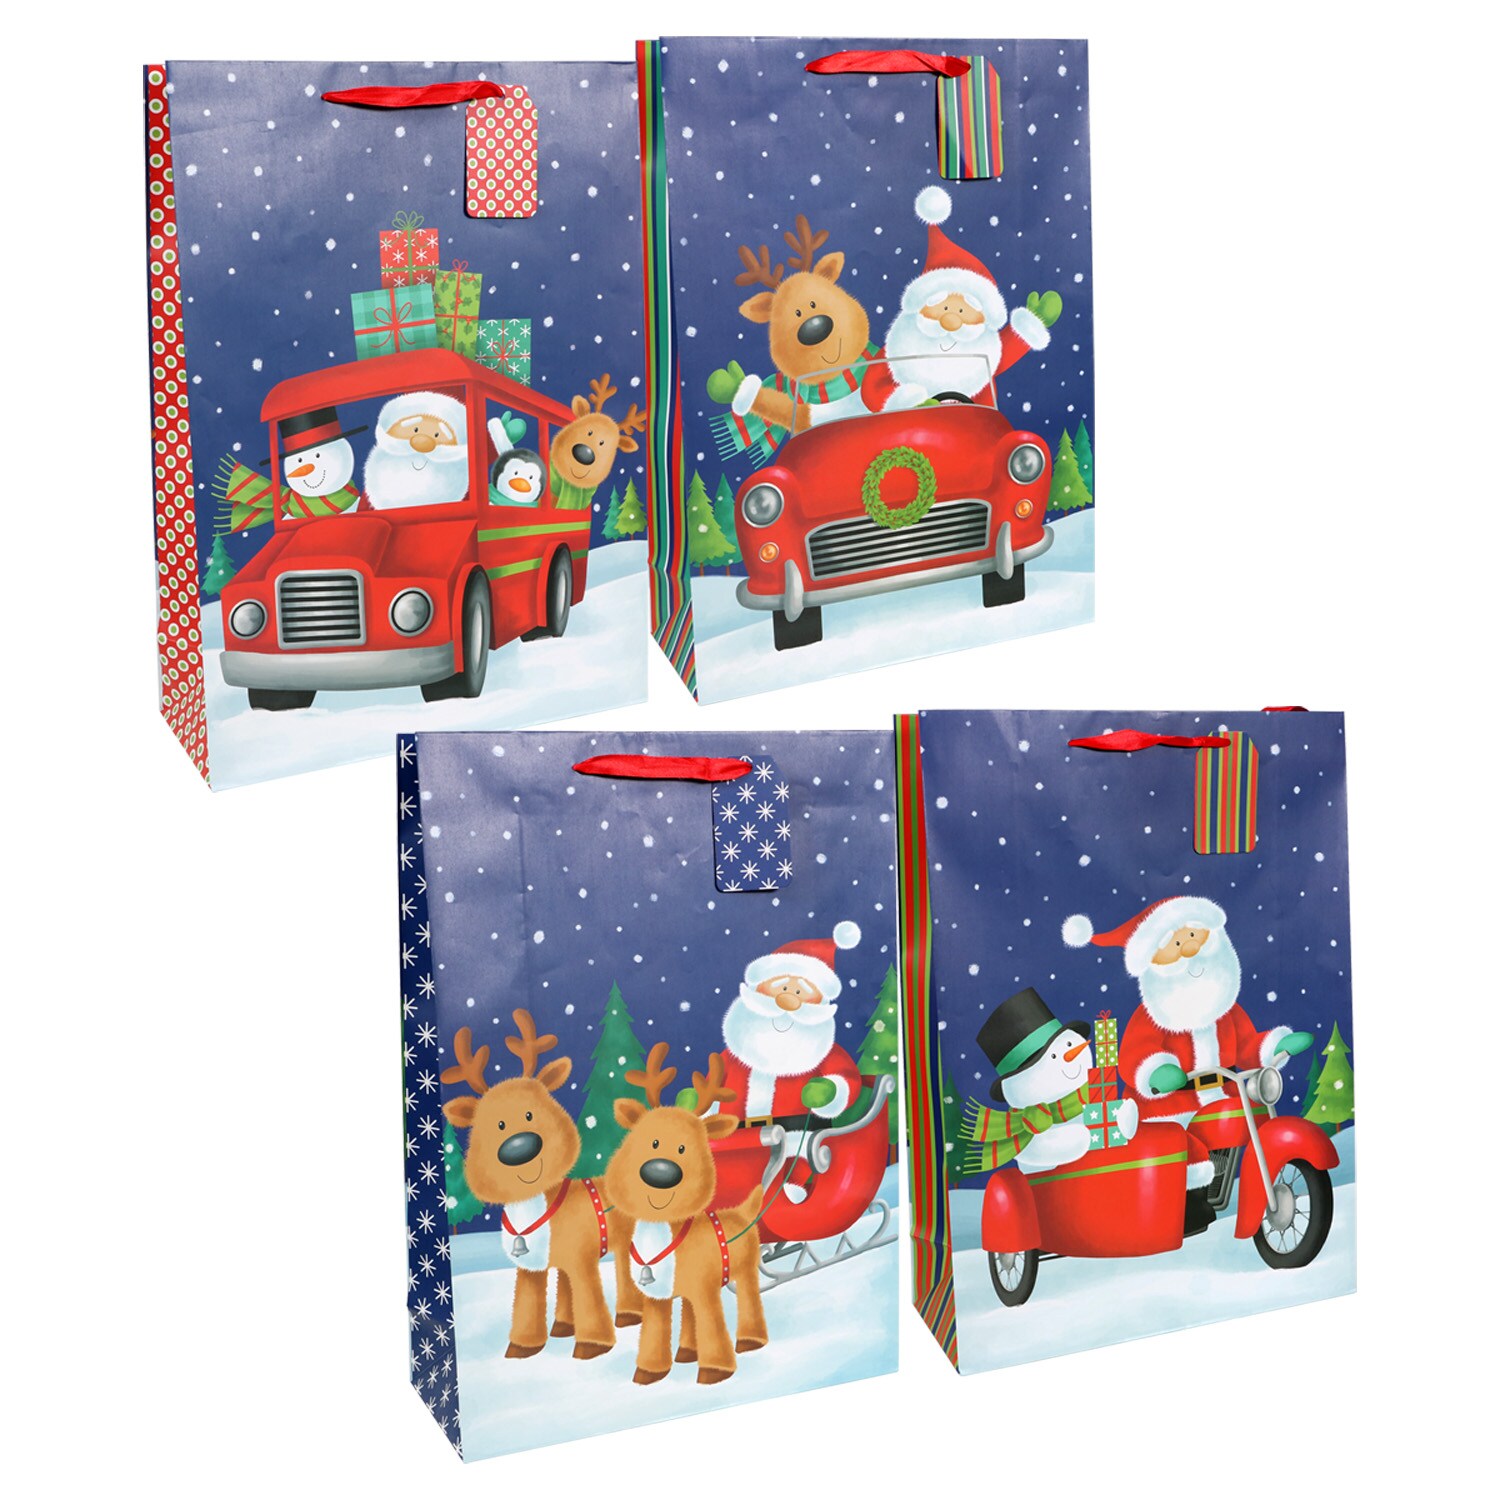 Details about   Red White New Gift Card Holder Bags By Christmas House Santa Claus 4.5"H x4.25"W